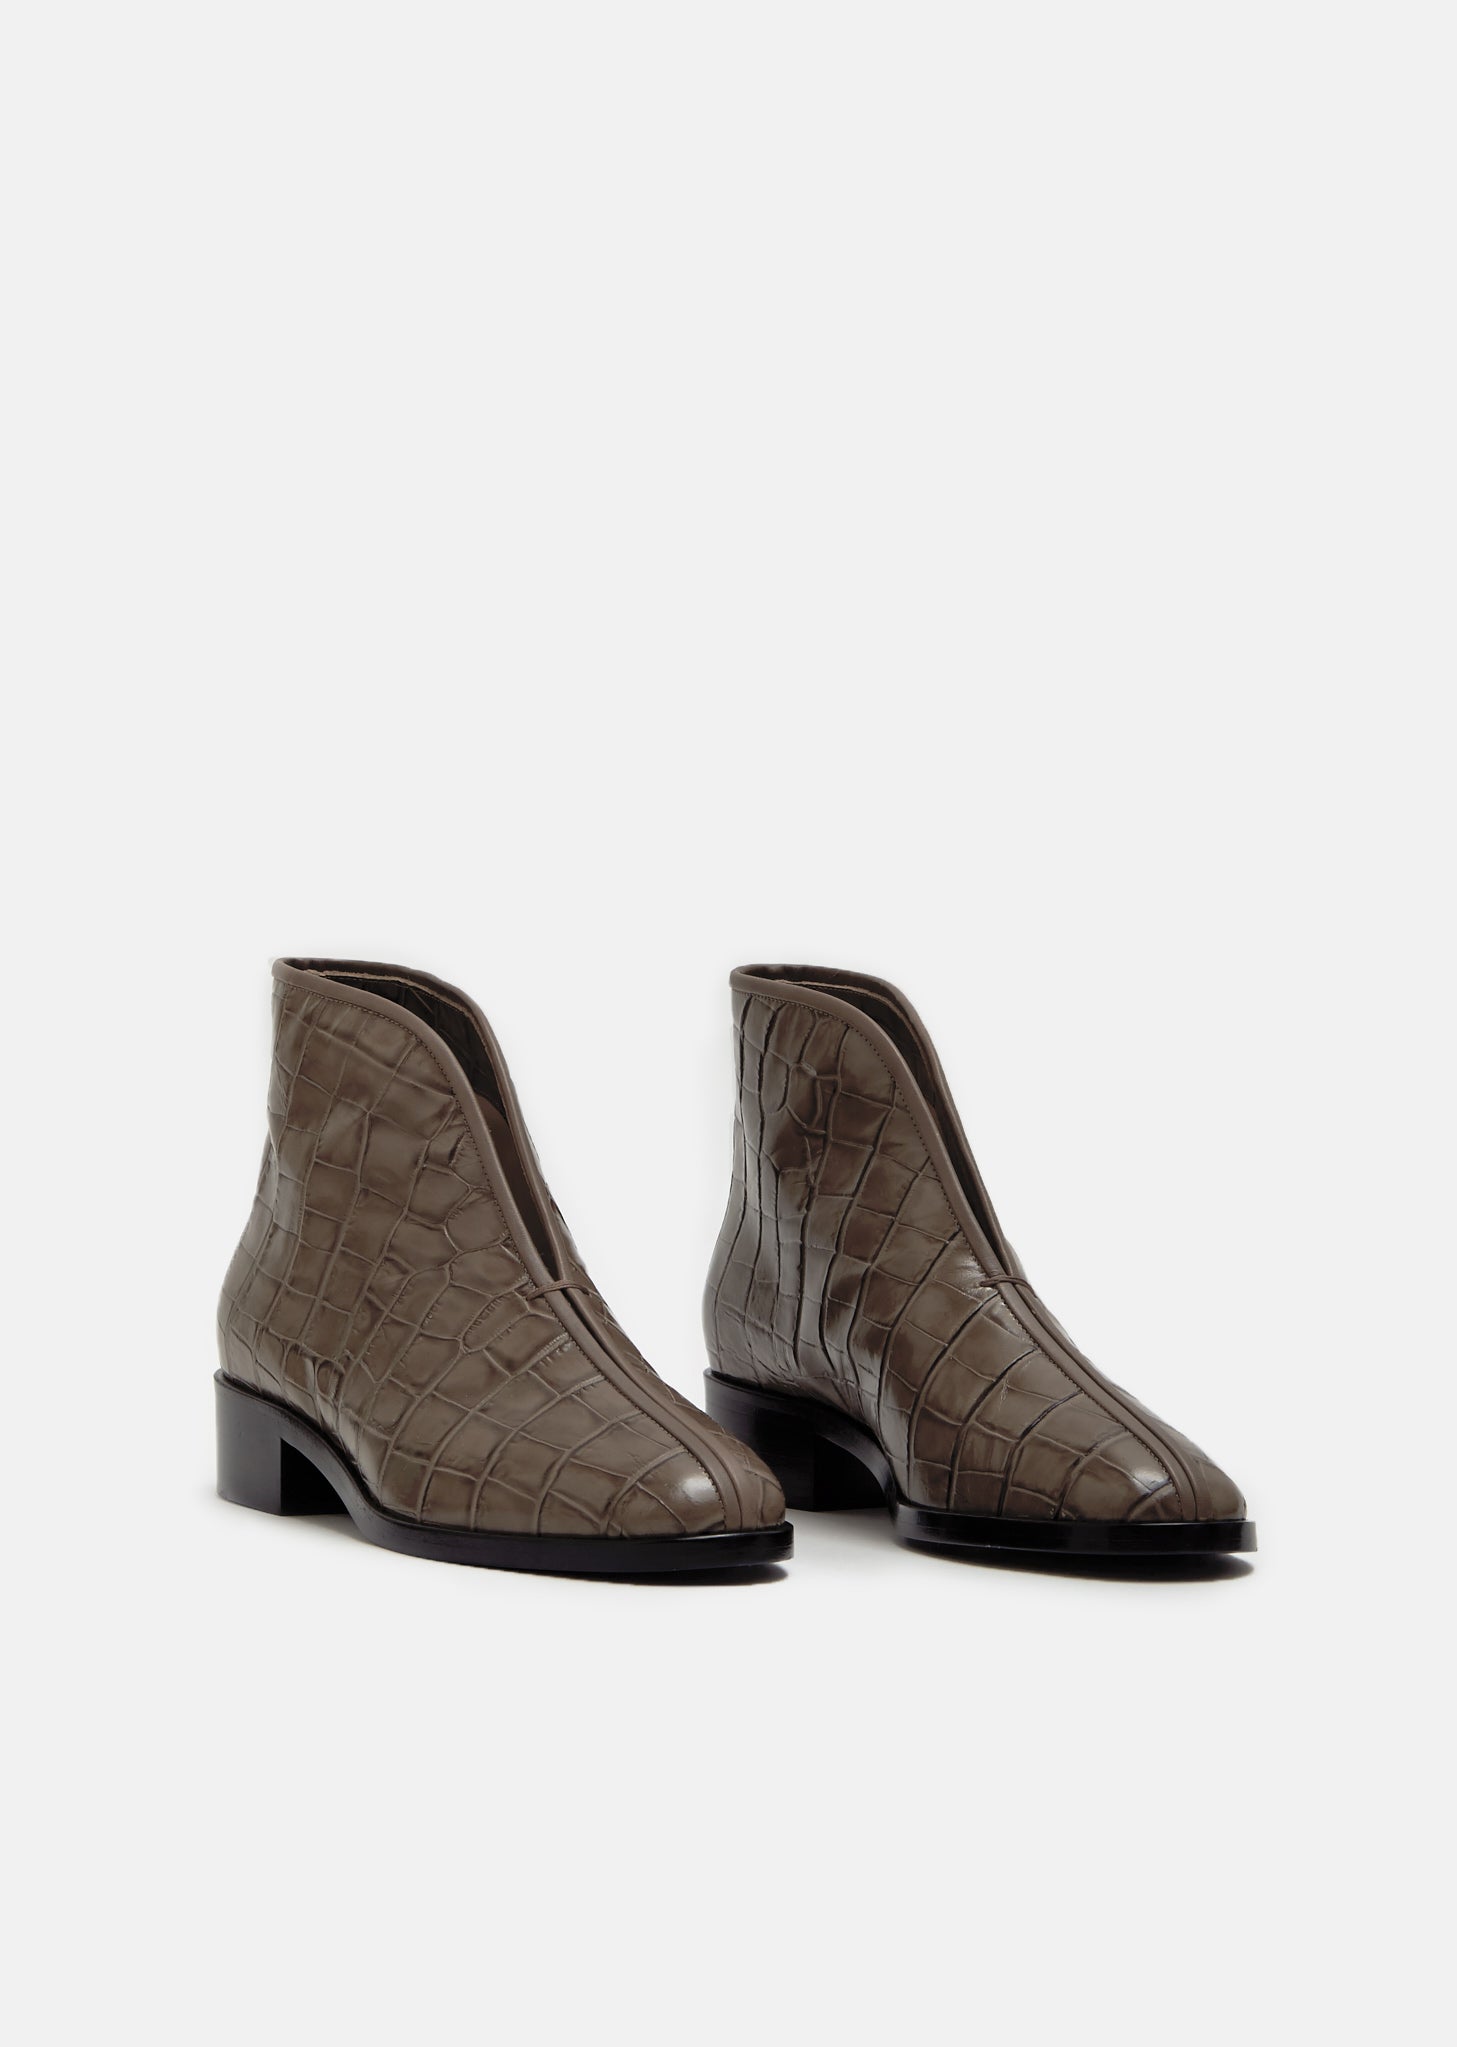 embossed boots